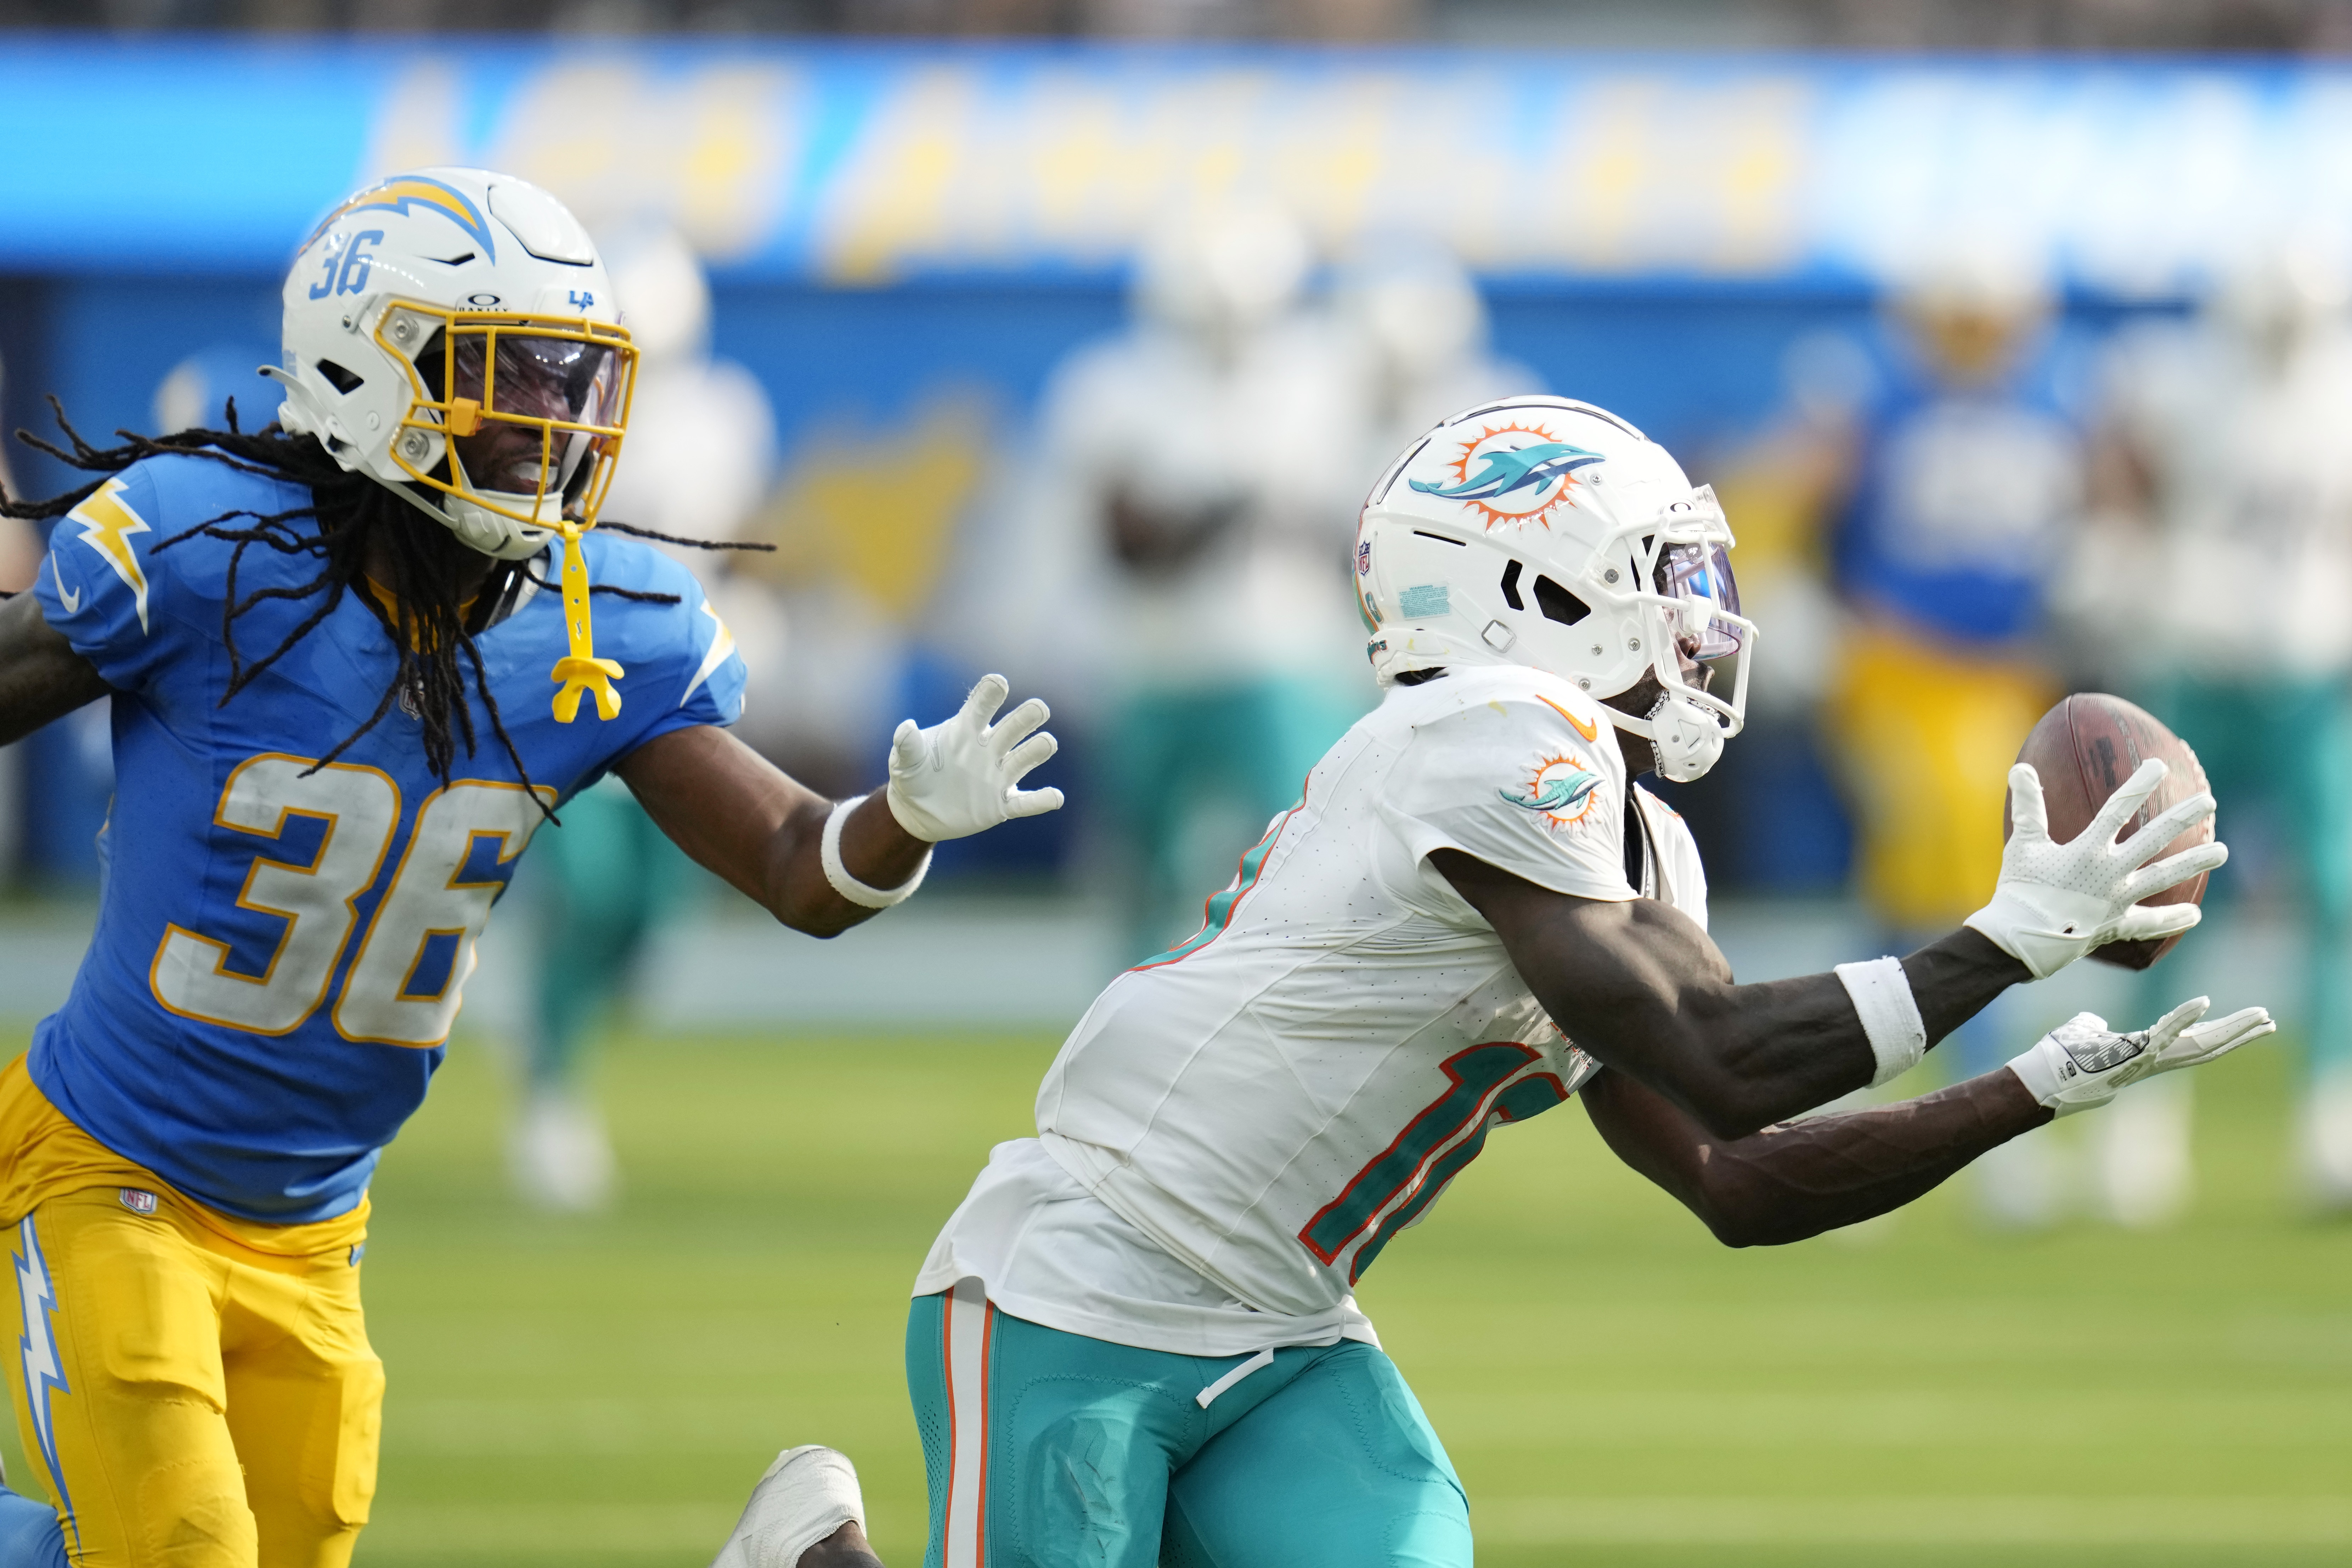 chargers at dolphins